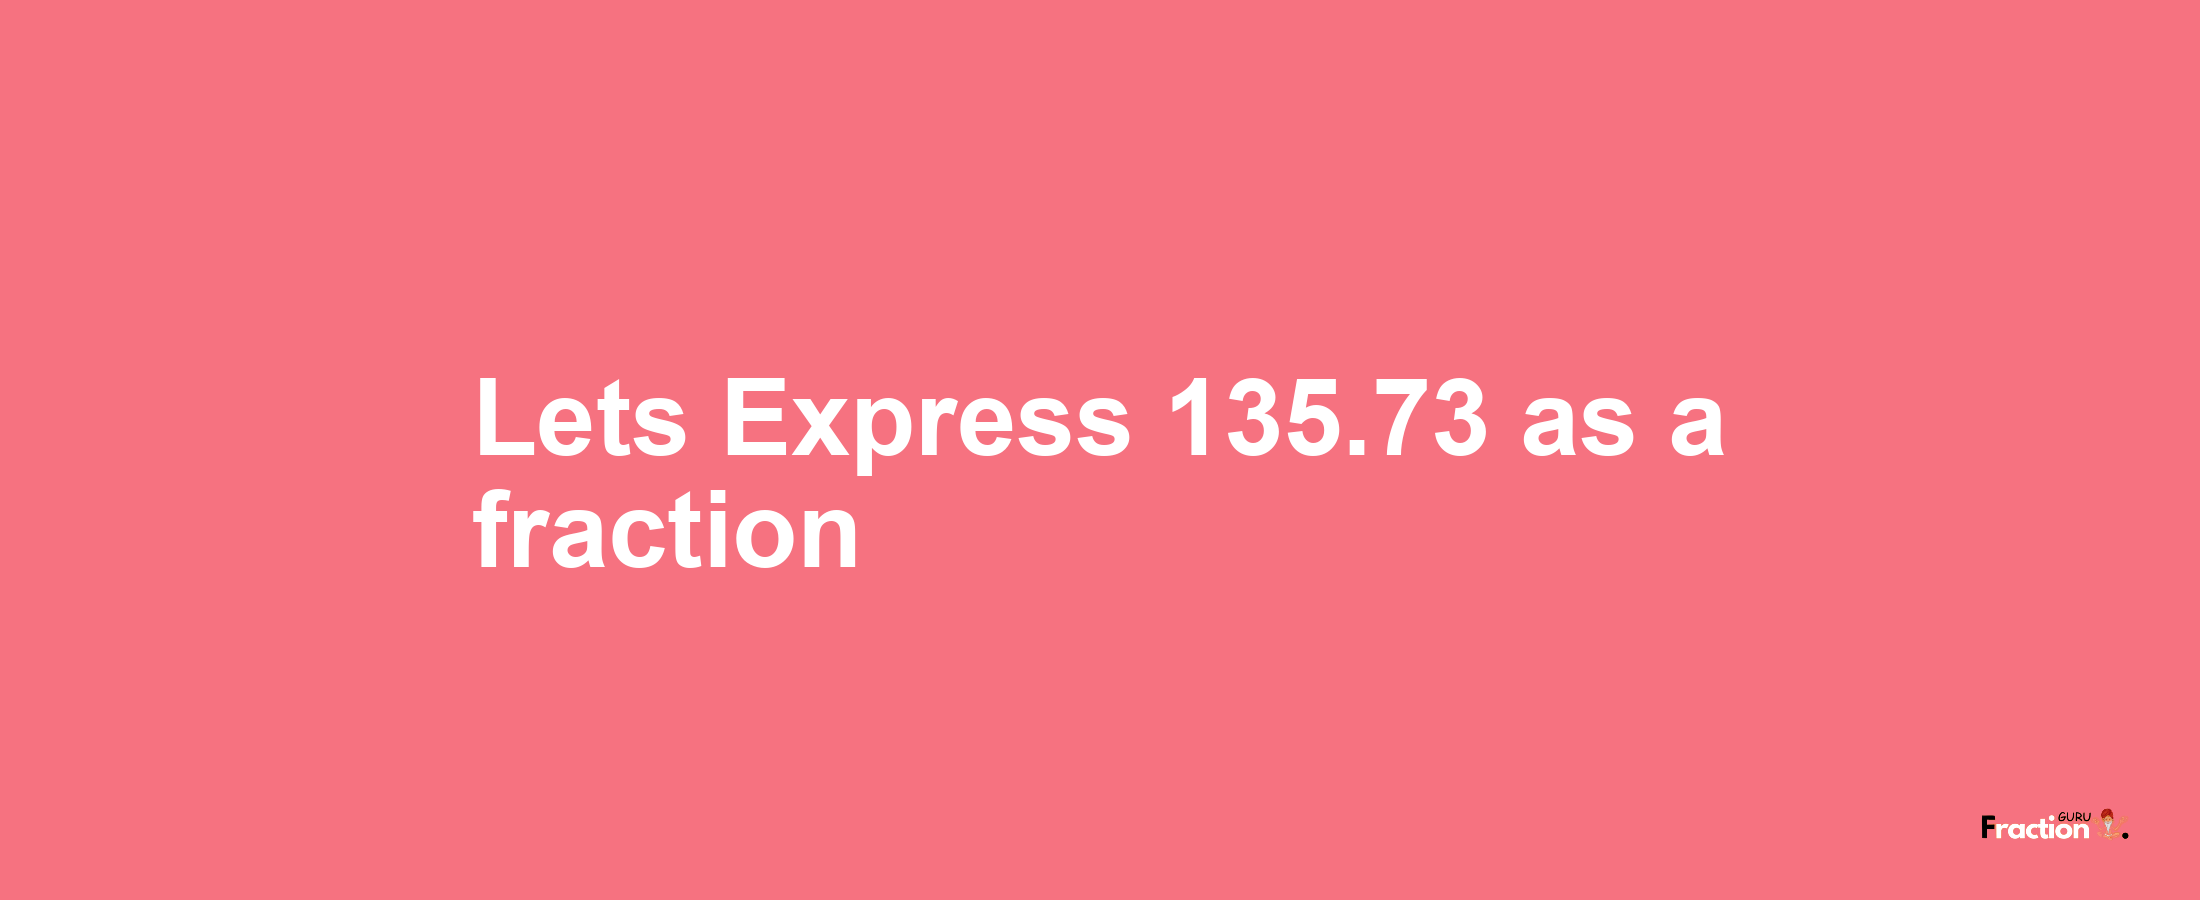 Lets Express 135.73 as afraction